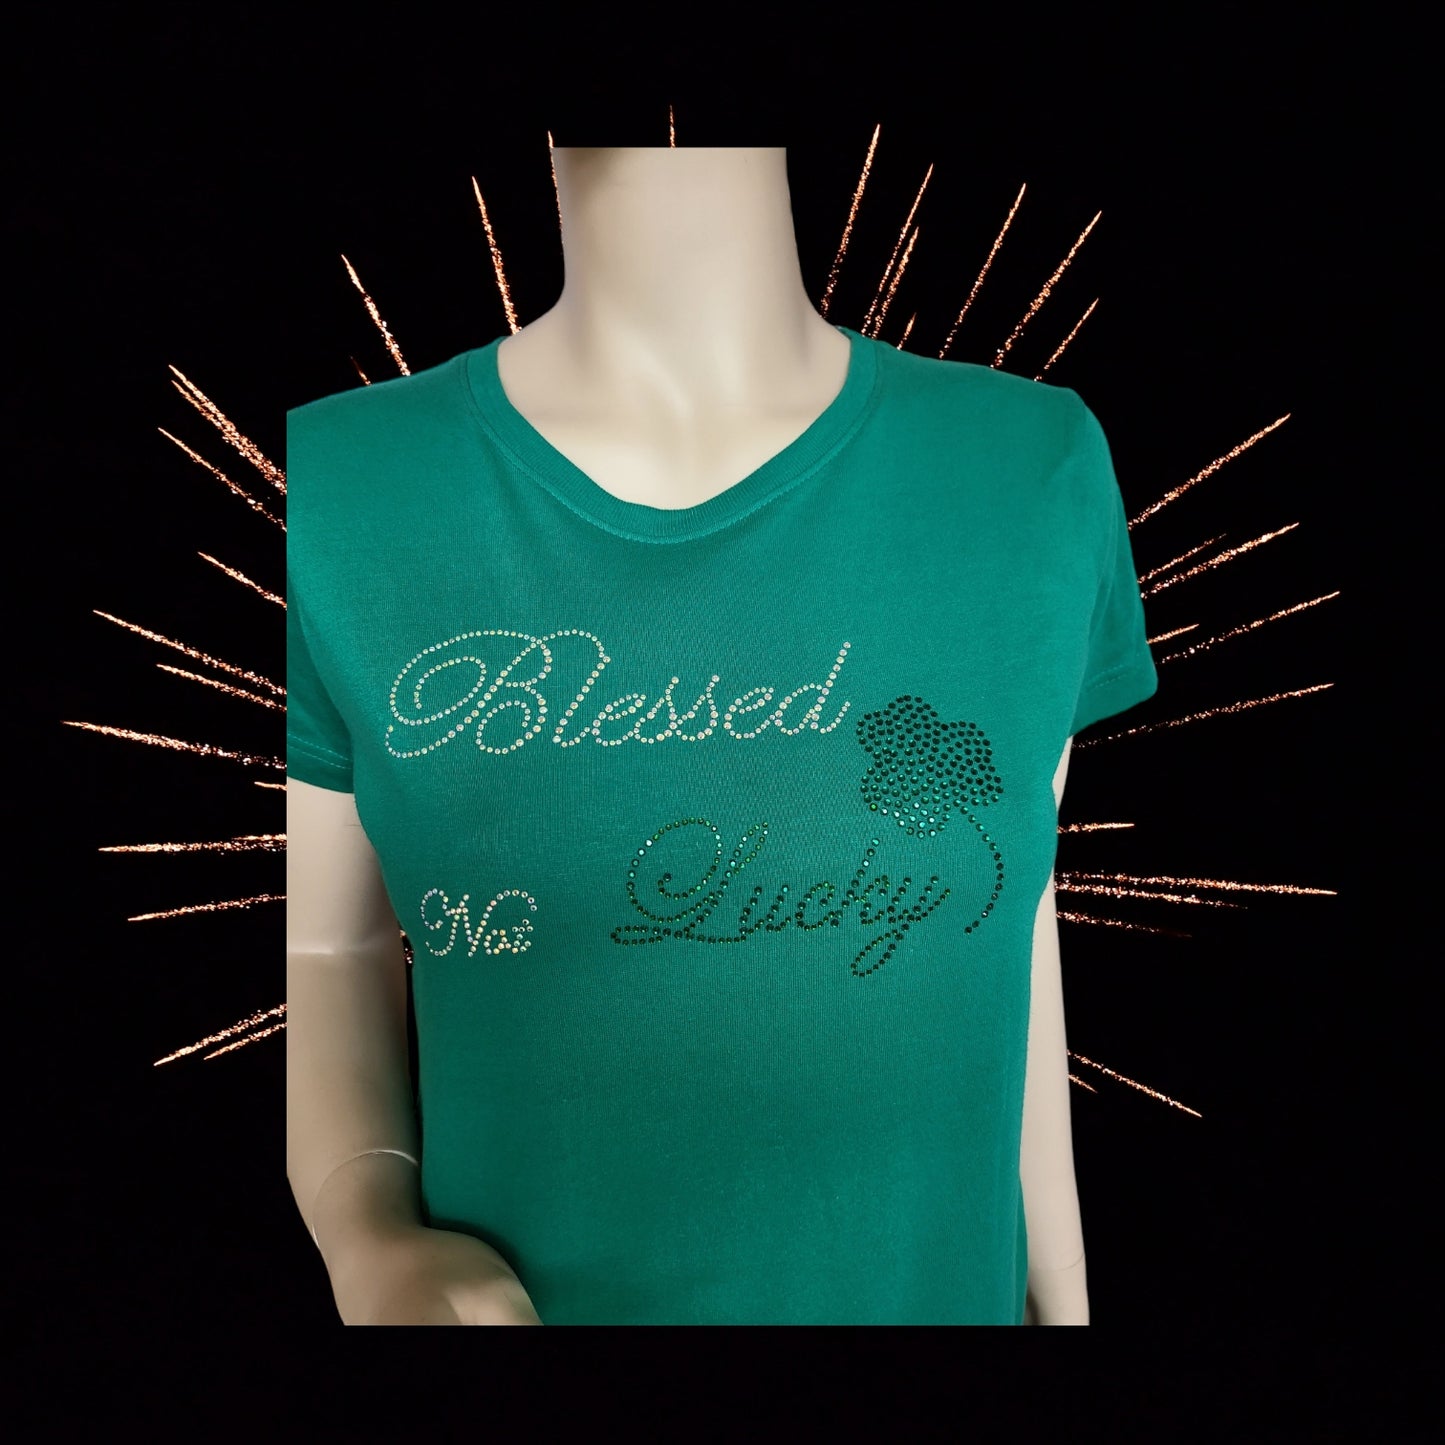 Blessed.. not Lucky T shirt